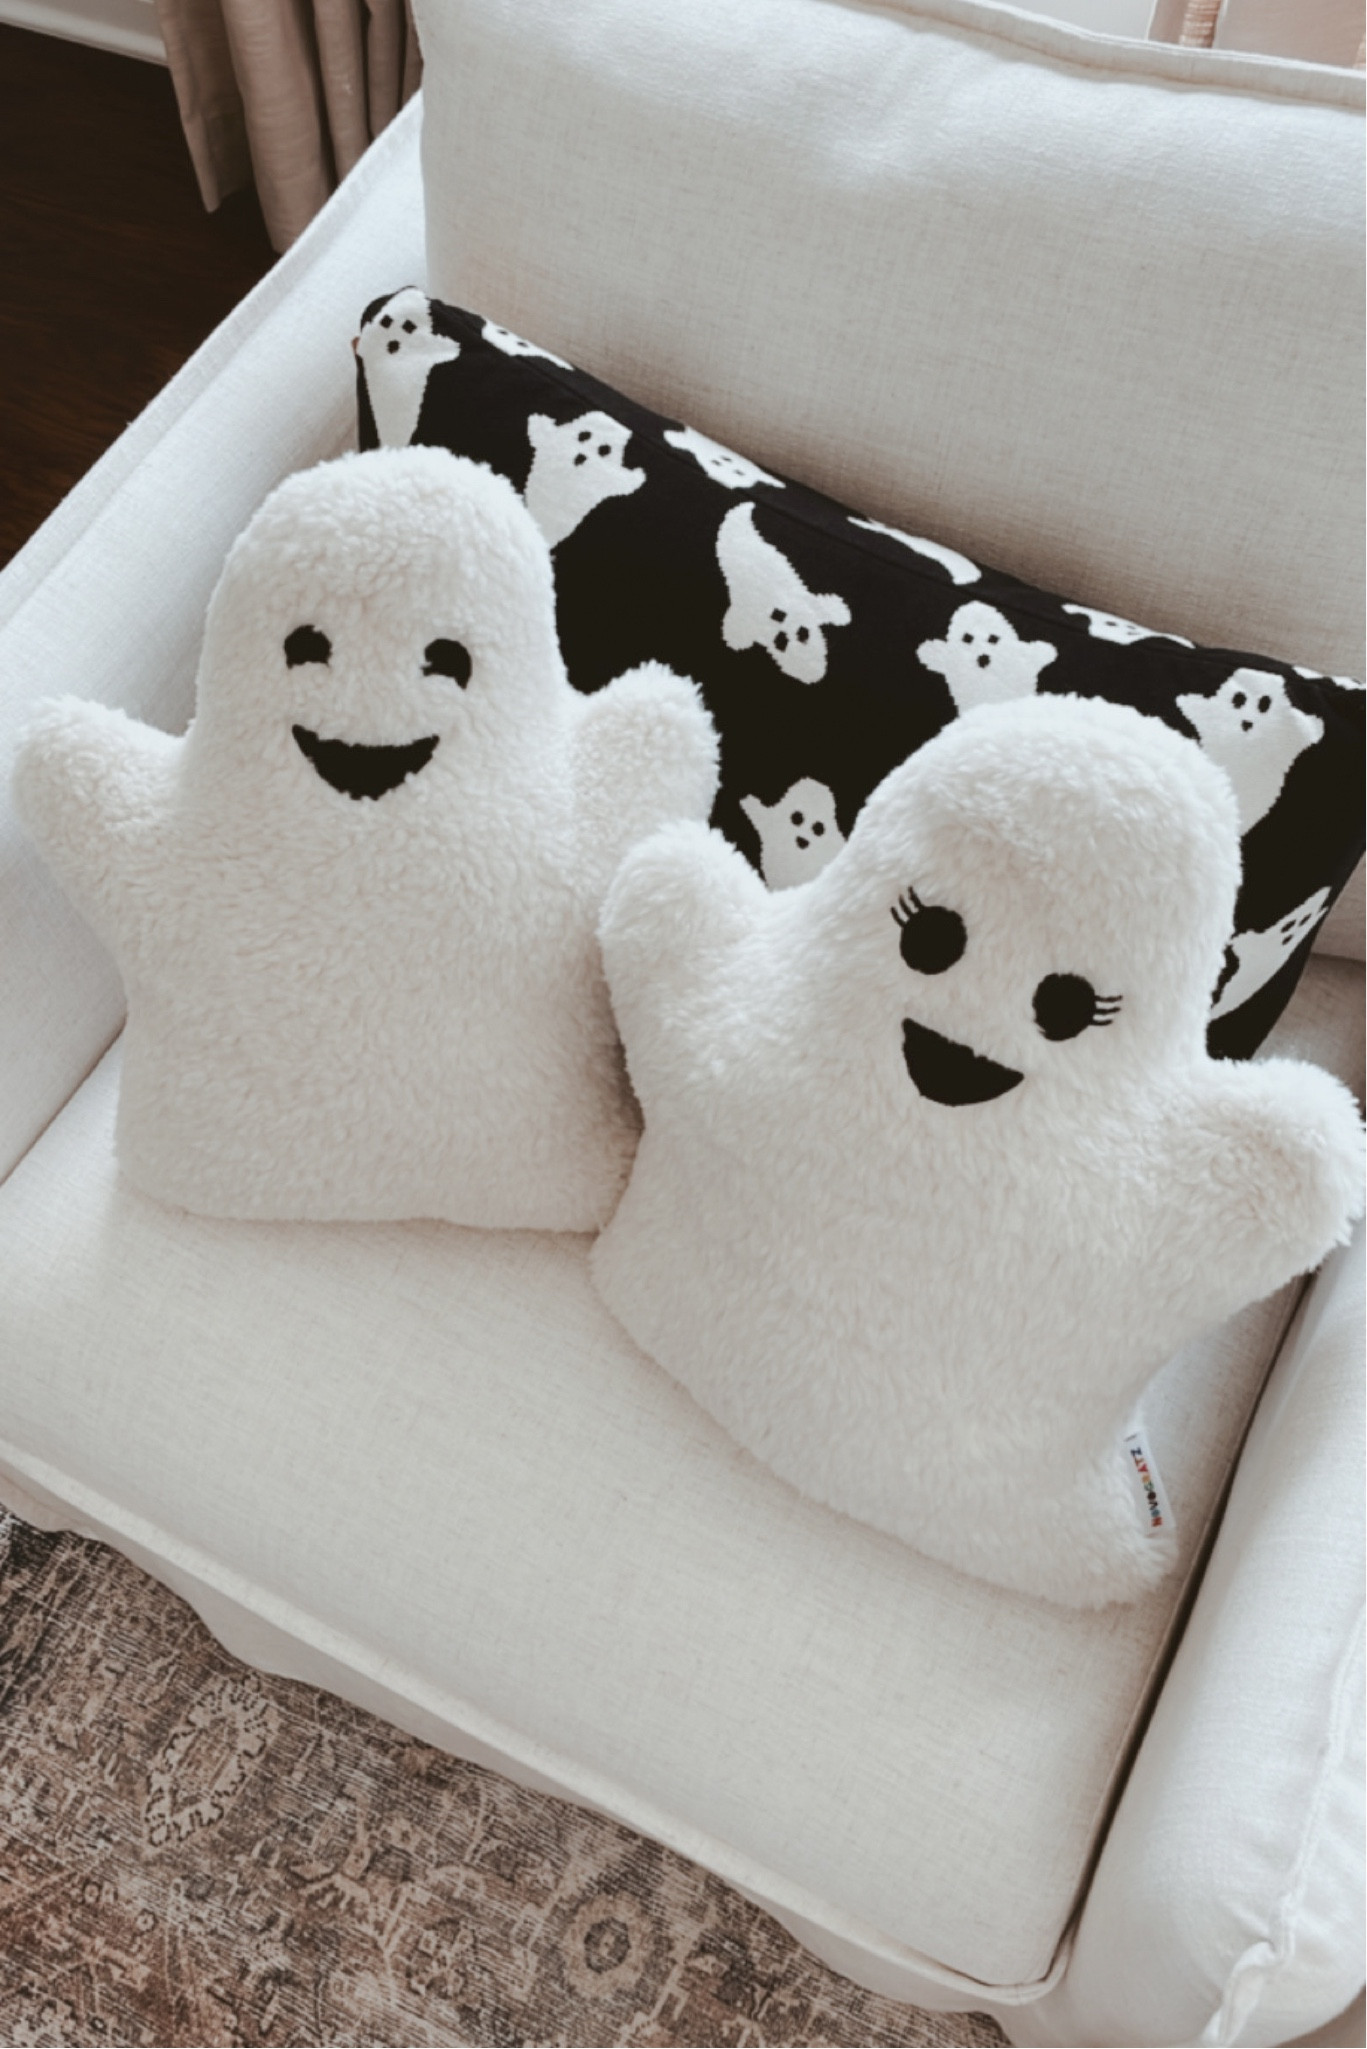 Home & Living :: Home Decor :: Pillows & Cushions :: Furry Ghost Pillow,  Halloween Decor, black and white, spooky stuffed animal, ghoul, halloween  pillow, plush, party decorations, goth gift cute